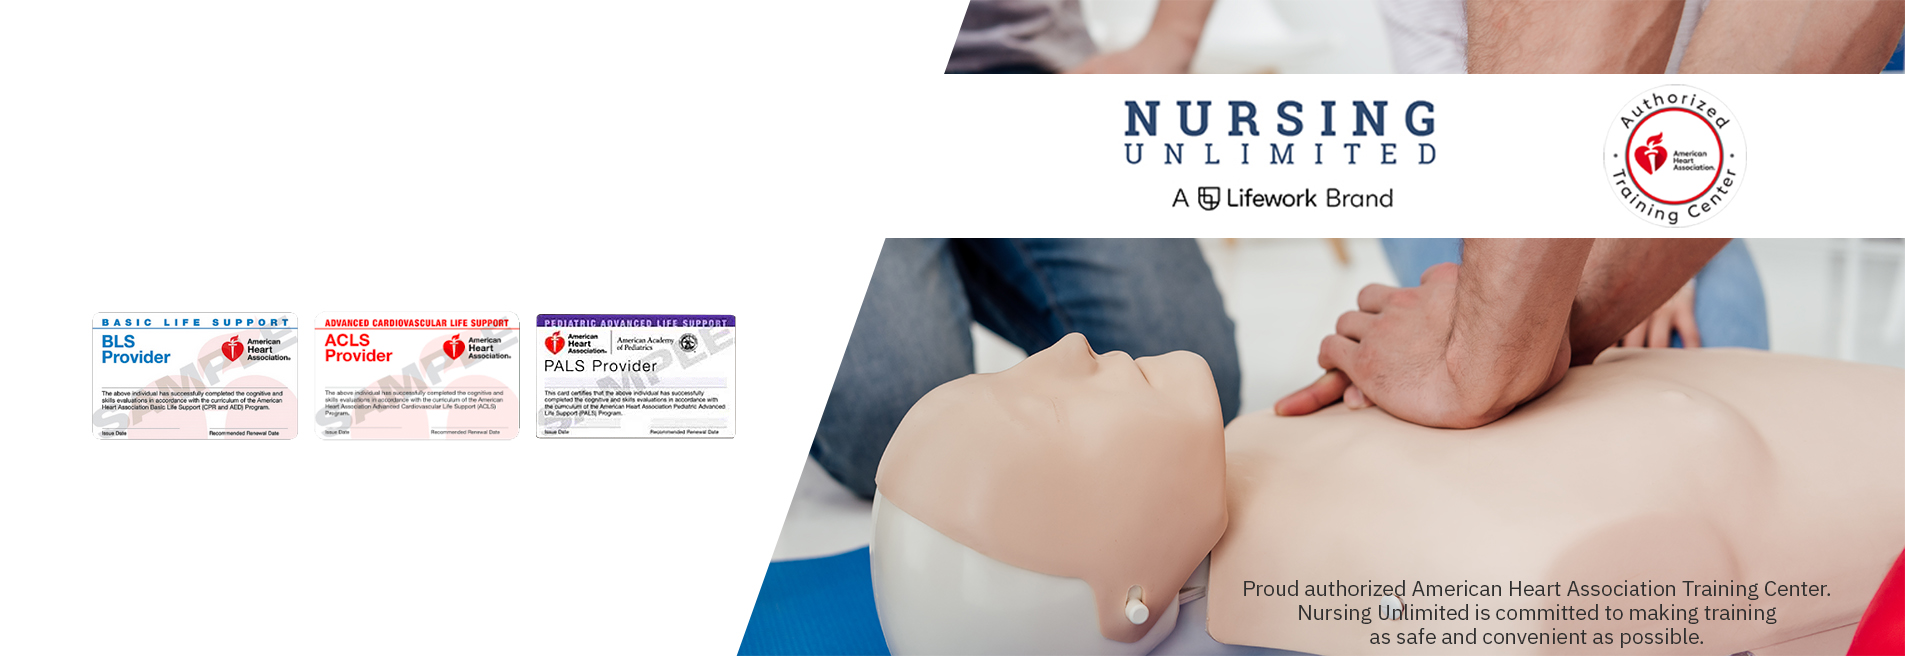 Proud authorized American Heart Association Training Center. Nursing Unlimited is committed to making training as safe and convenient as possible.